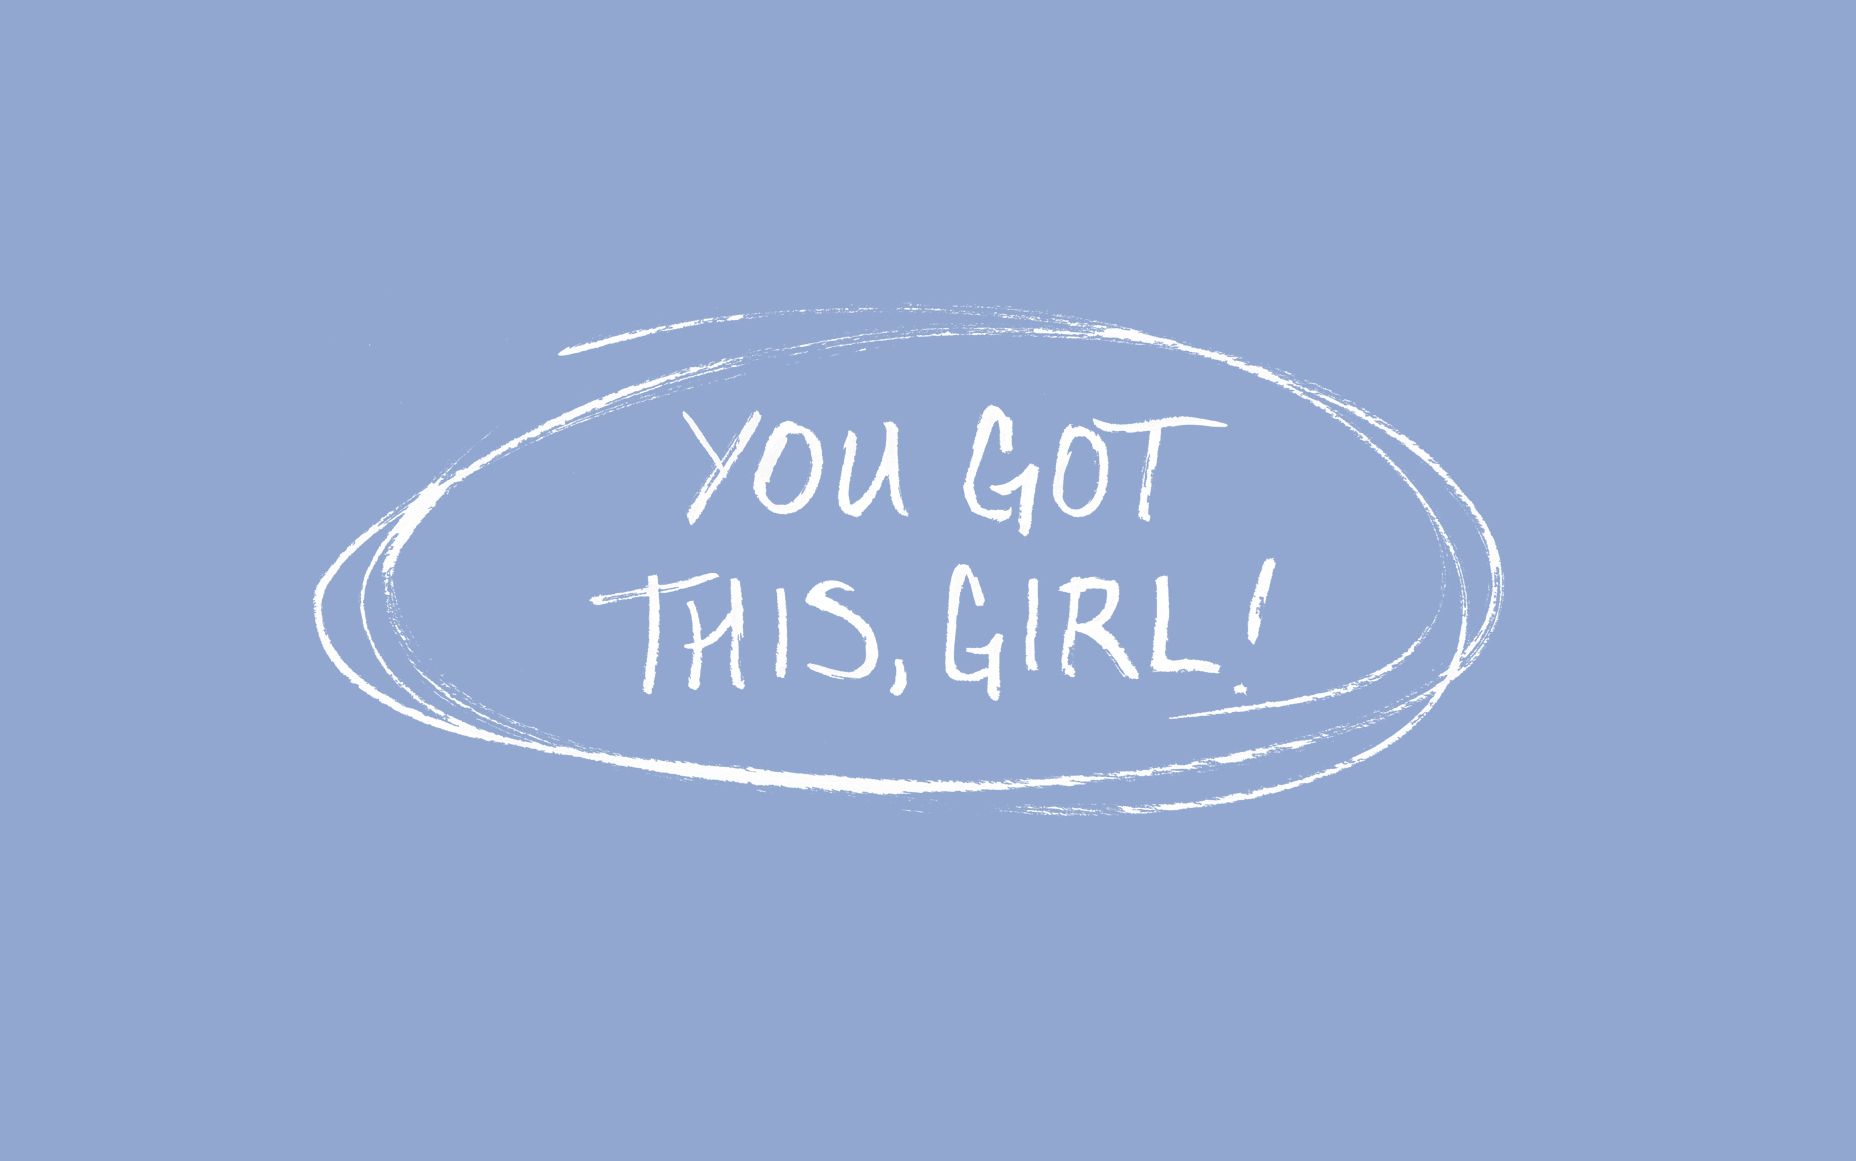 Free Wallpaper // You Got This, Girl!. The Free Woman